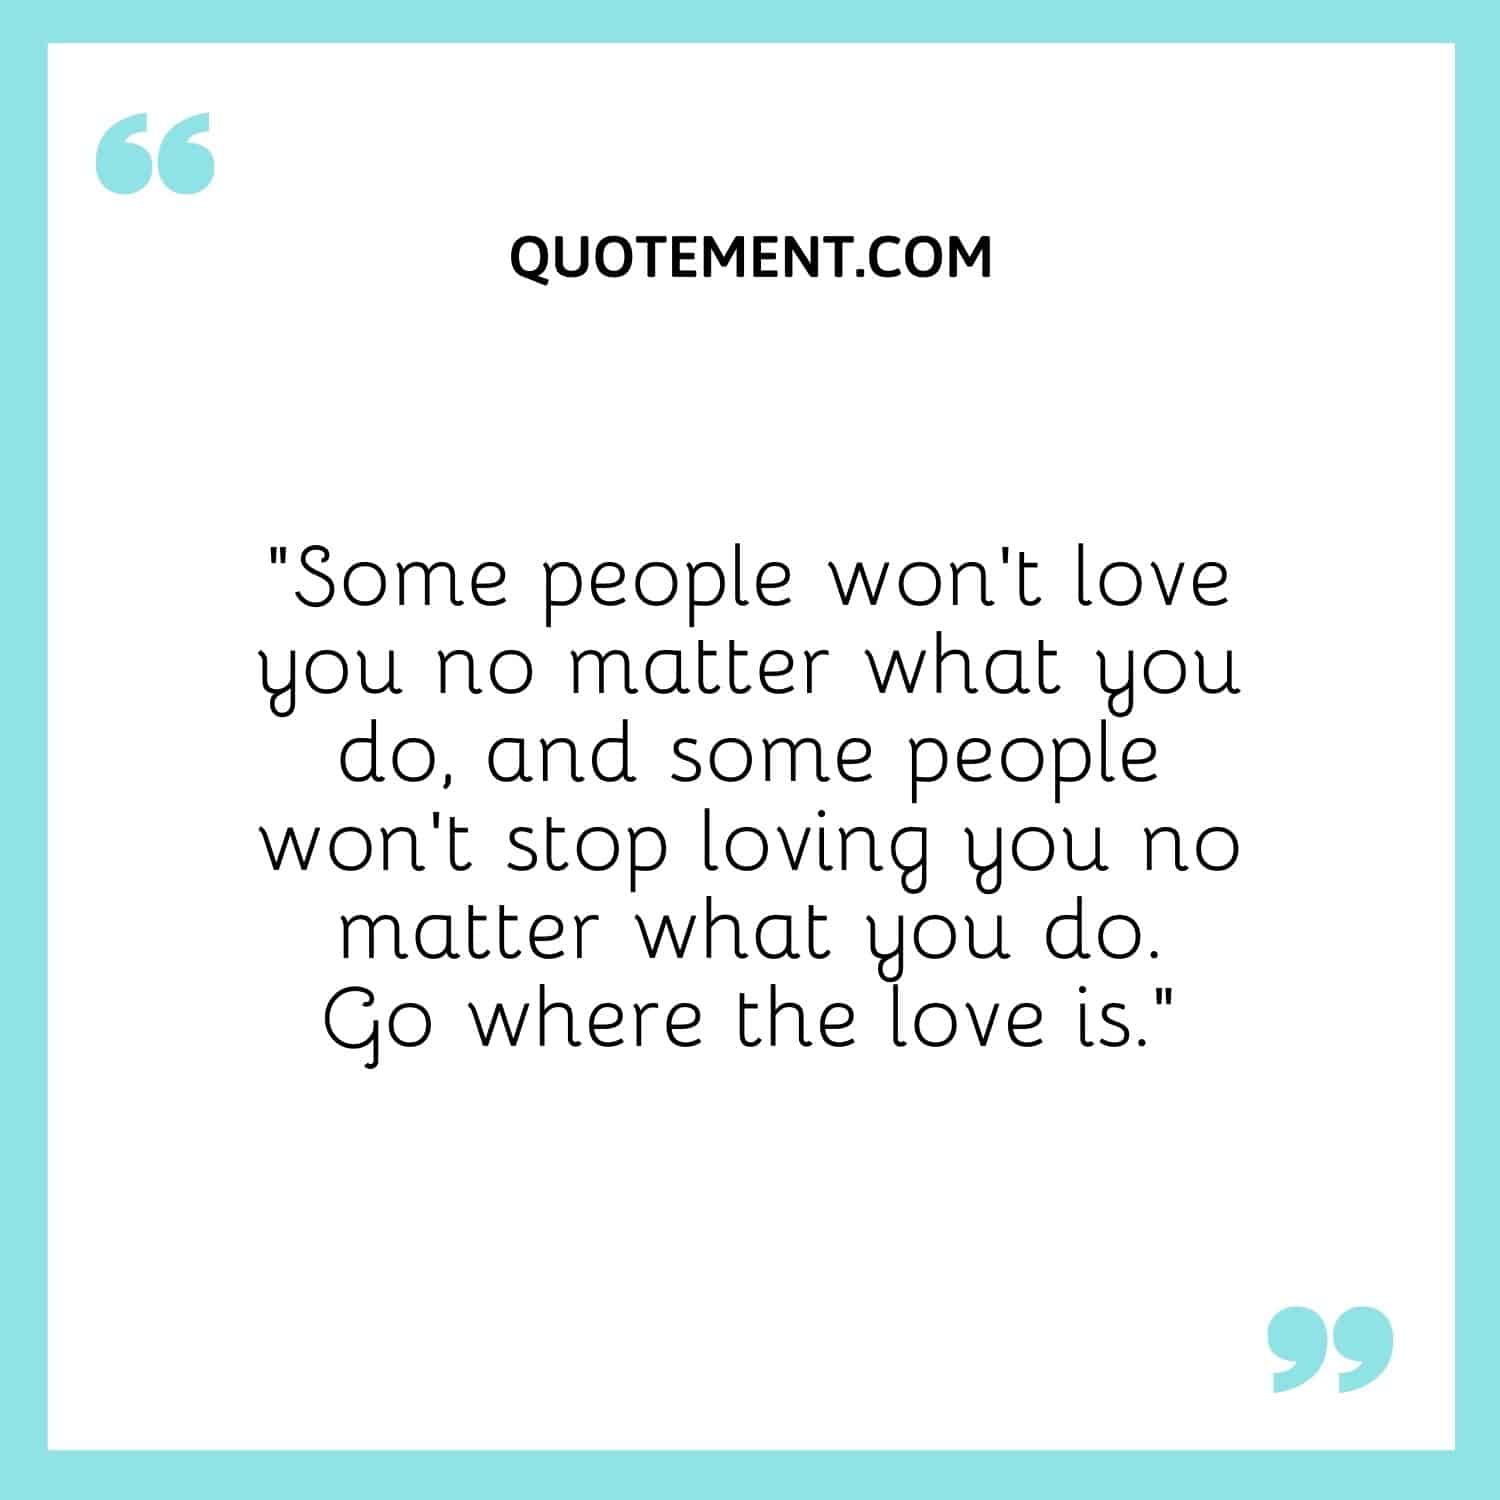 Some people won't love you no matter what you do.